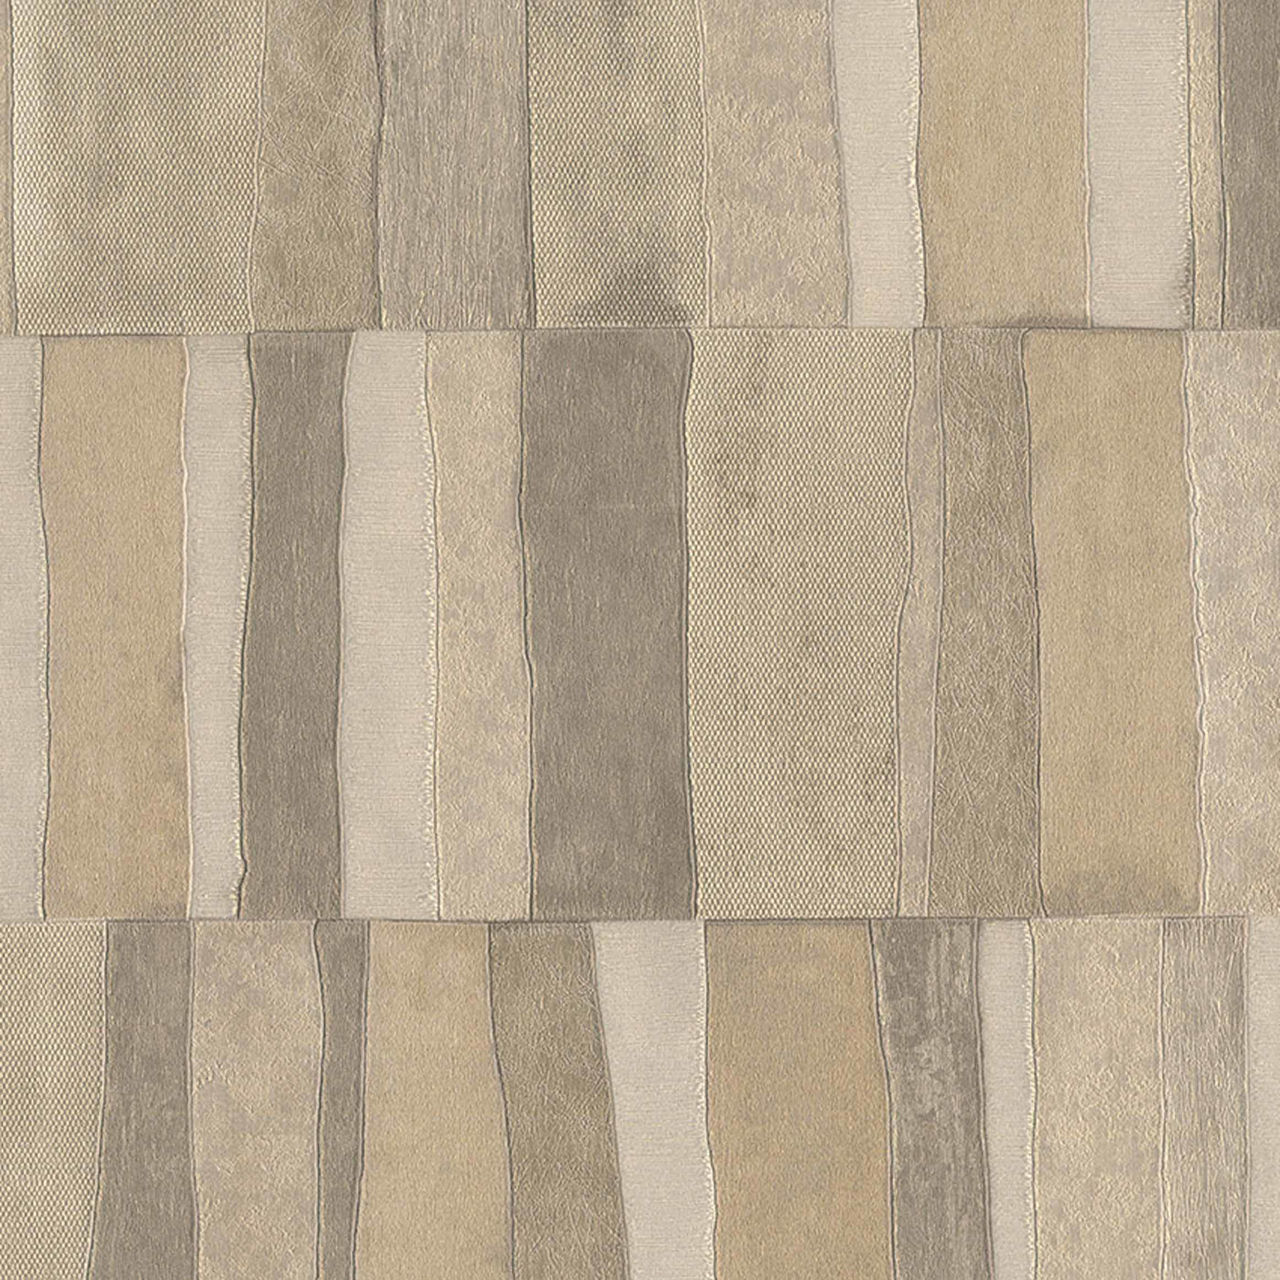 Picture of ΤΑΠΕΤΣΑΡΙΑ ΜΕ ΜΟΤΙΒΟ RITTER TILES - ΜΠΕΖ